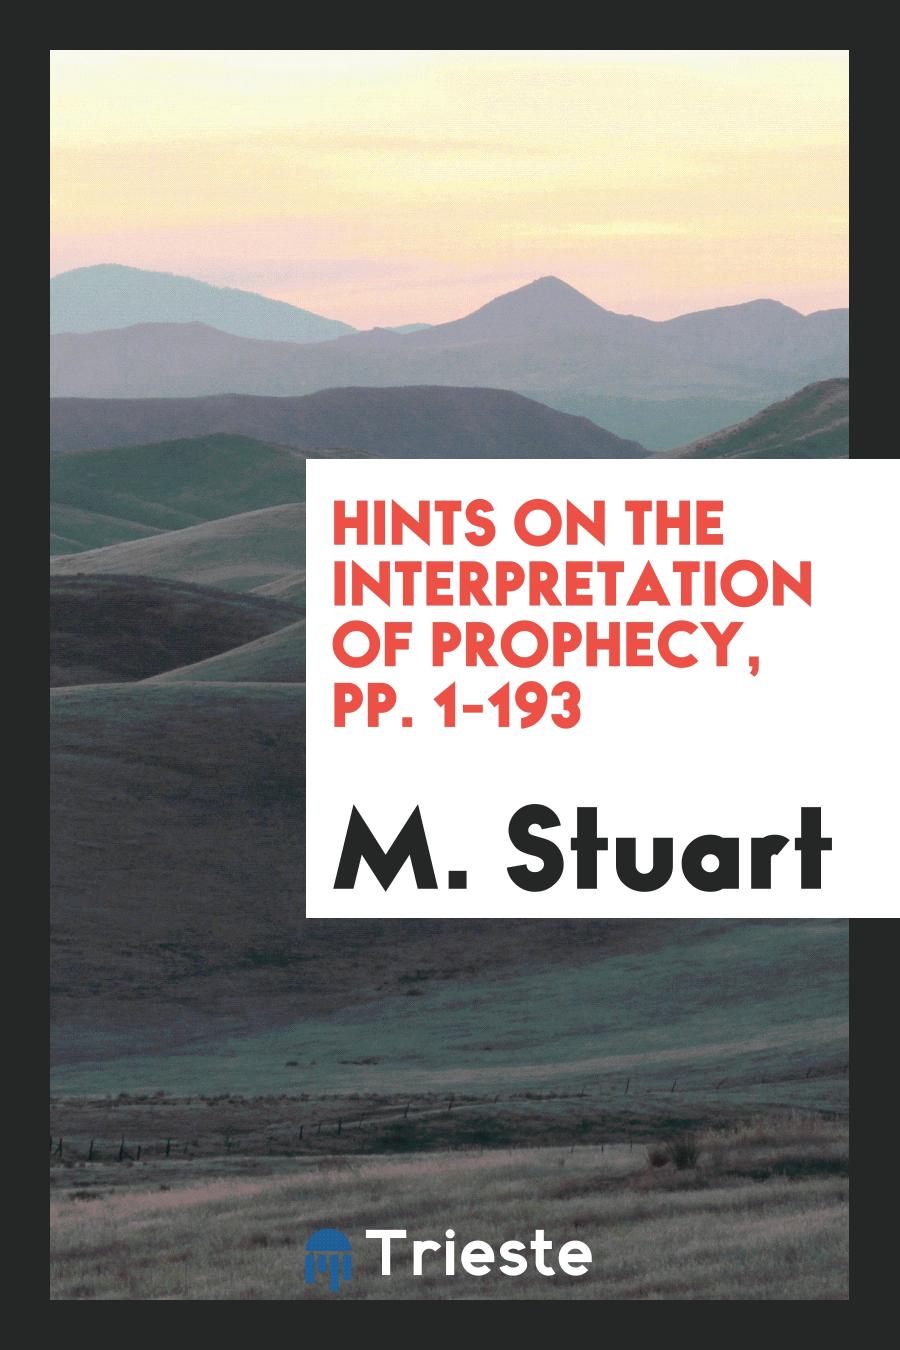 Hints on the Interpretation of Prophecy, pp. 1-193